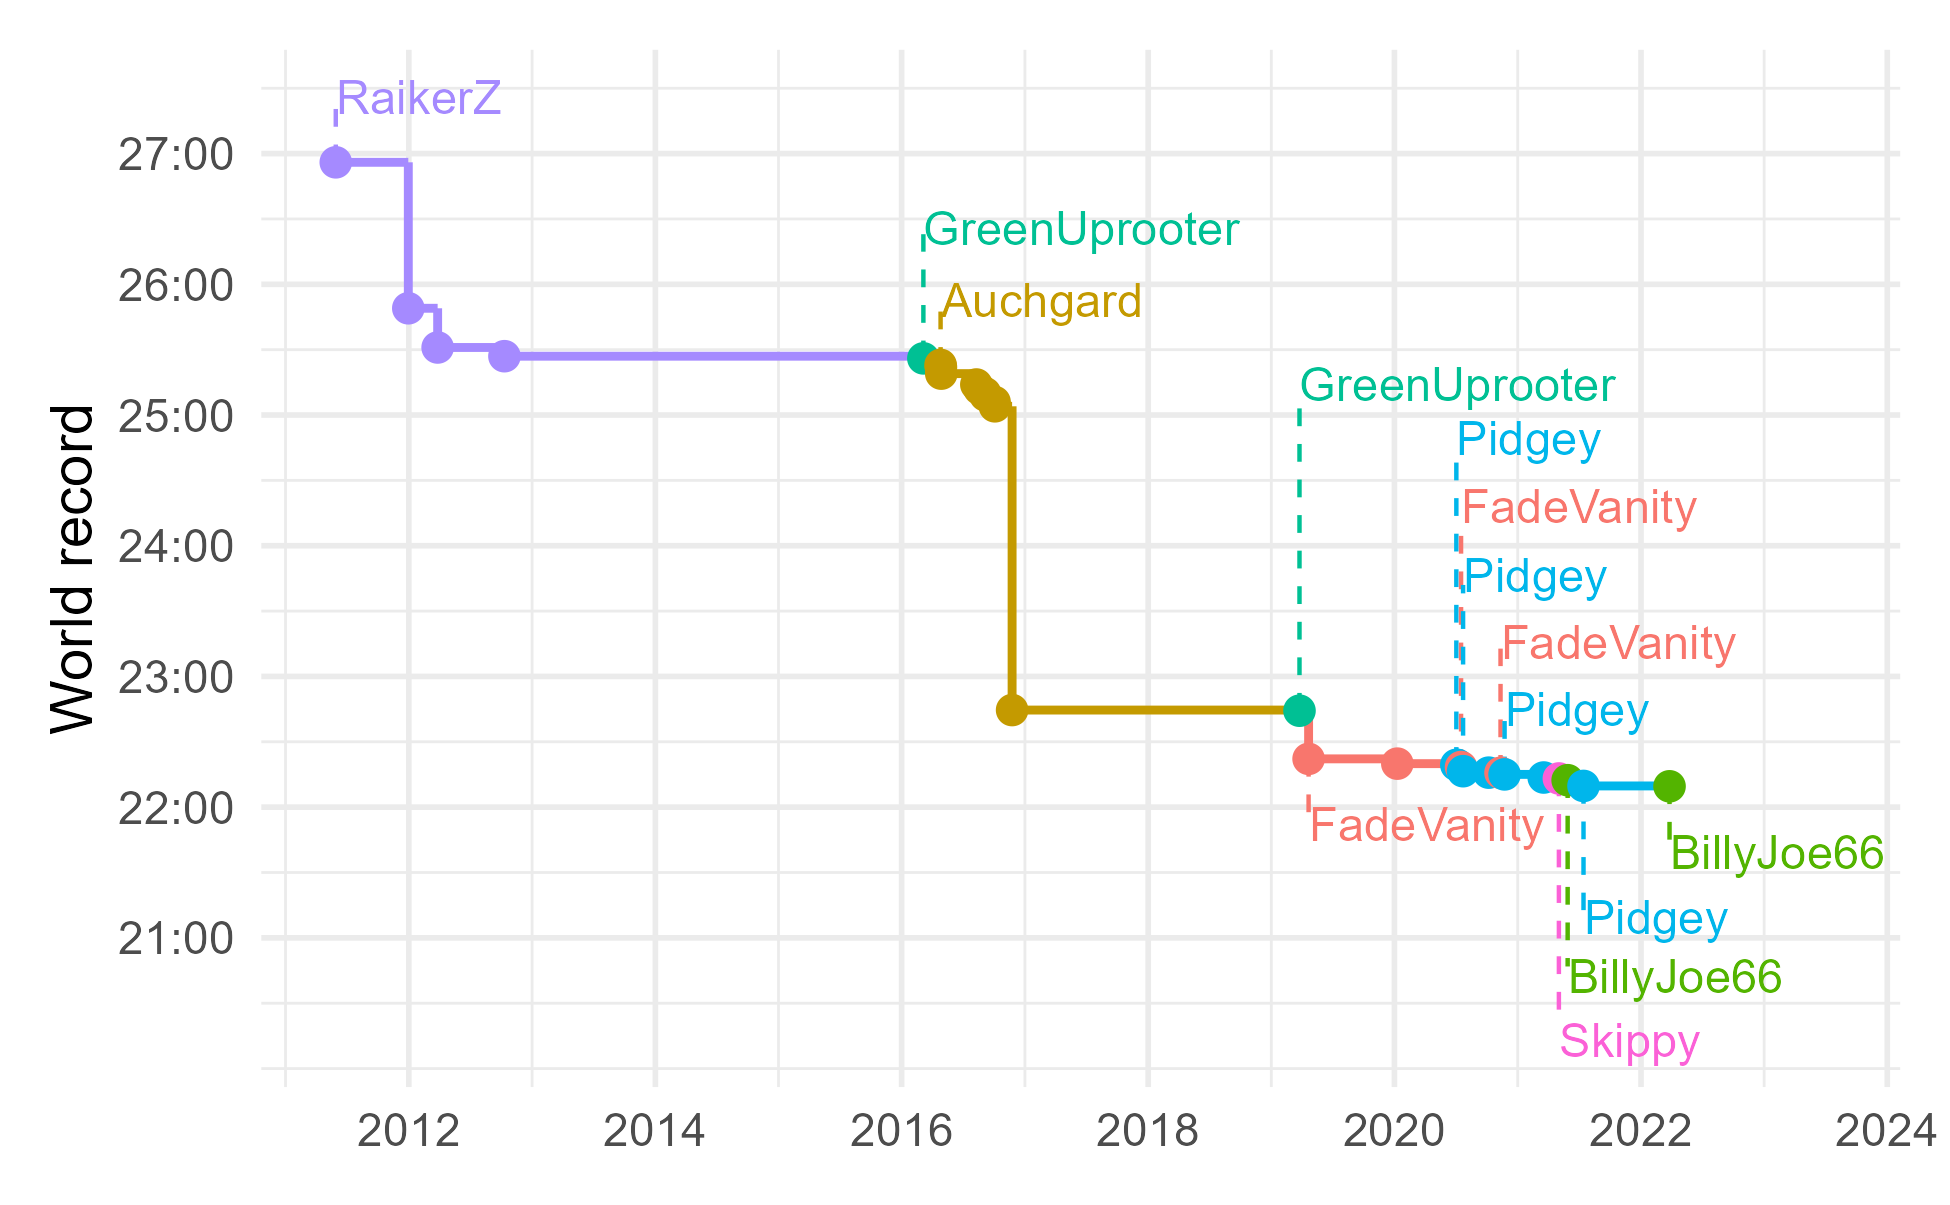 A step plot showing the world record progression. The name of the player is next to their point whenever the record changes.